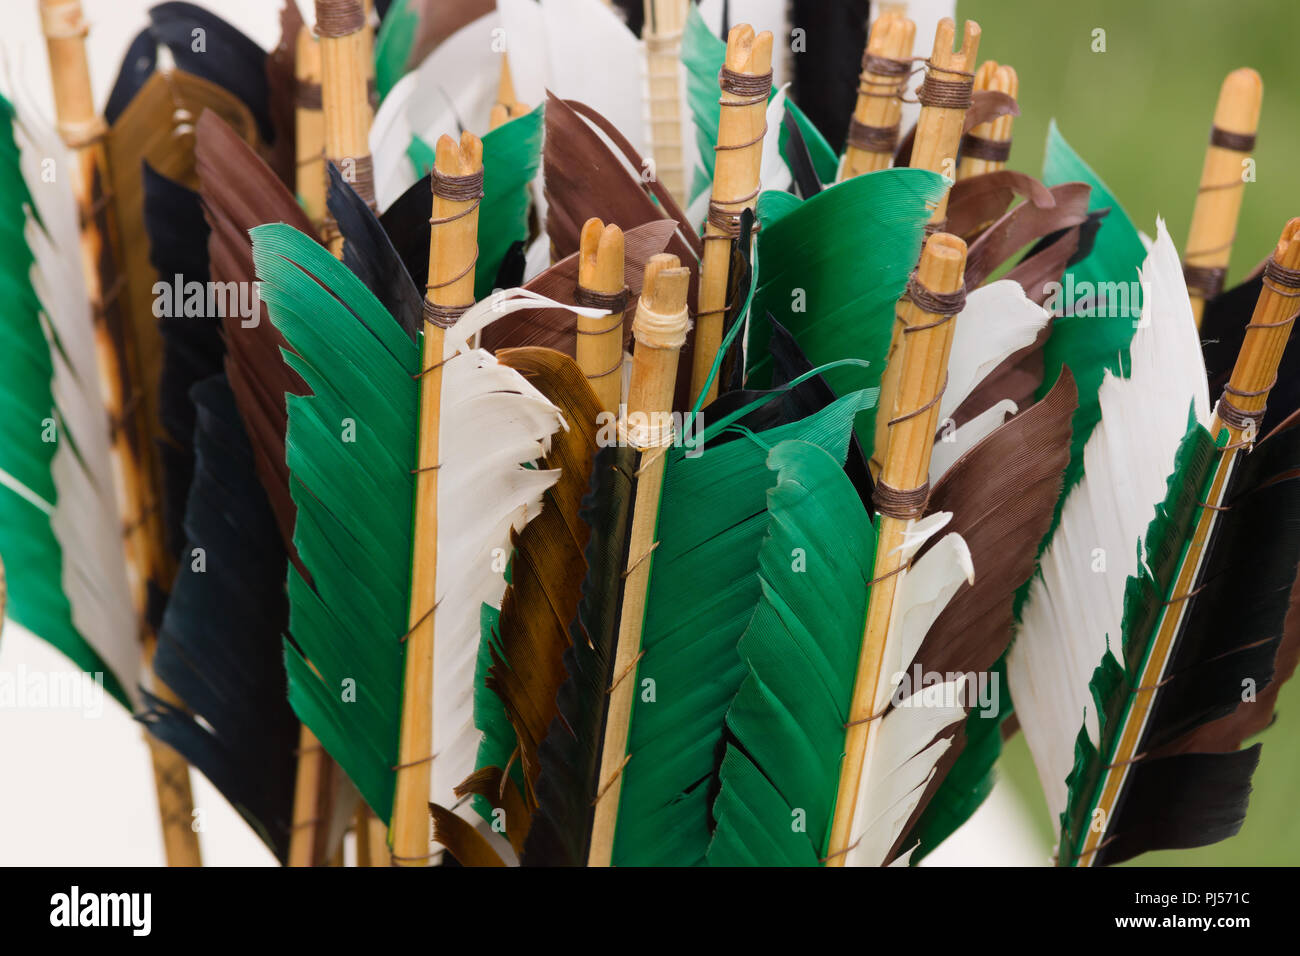 Medieval arrow fletchings or feathers traditionally attached with glue and thread they are used to stabilise the arrow in flight Stock Photo